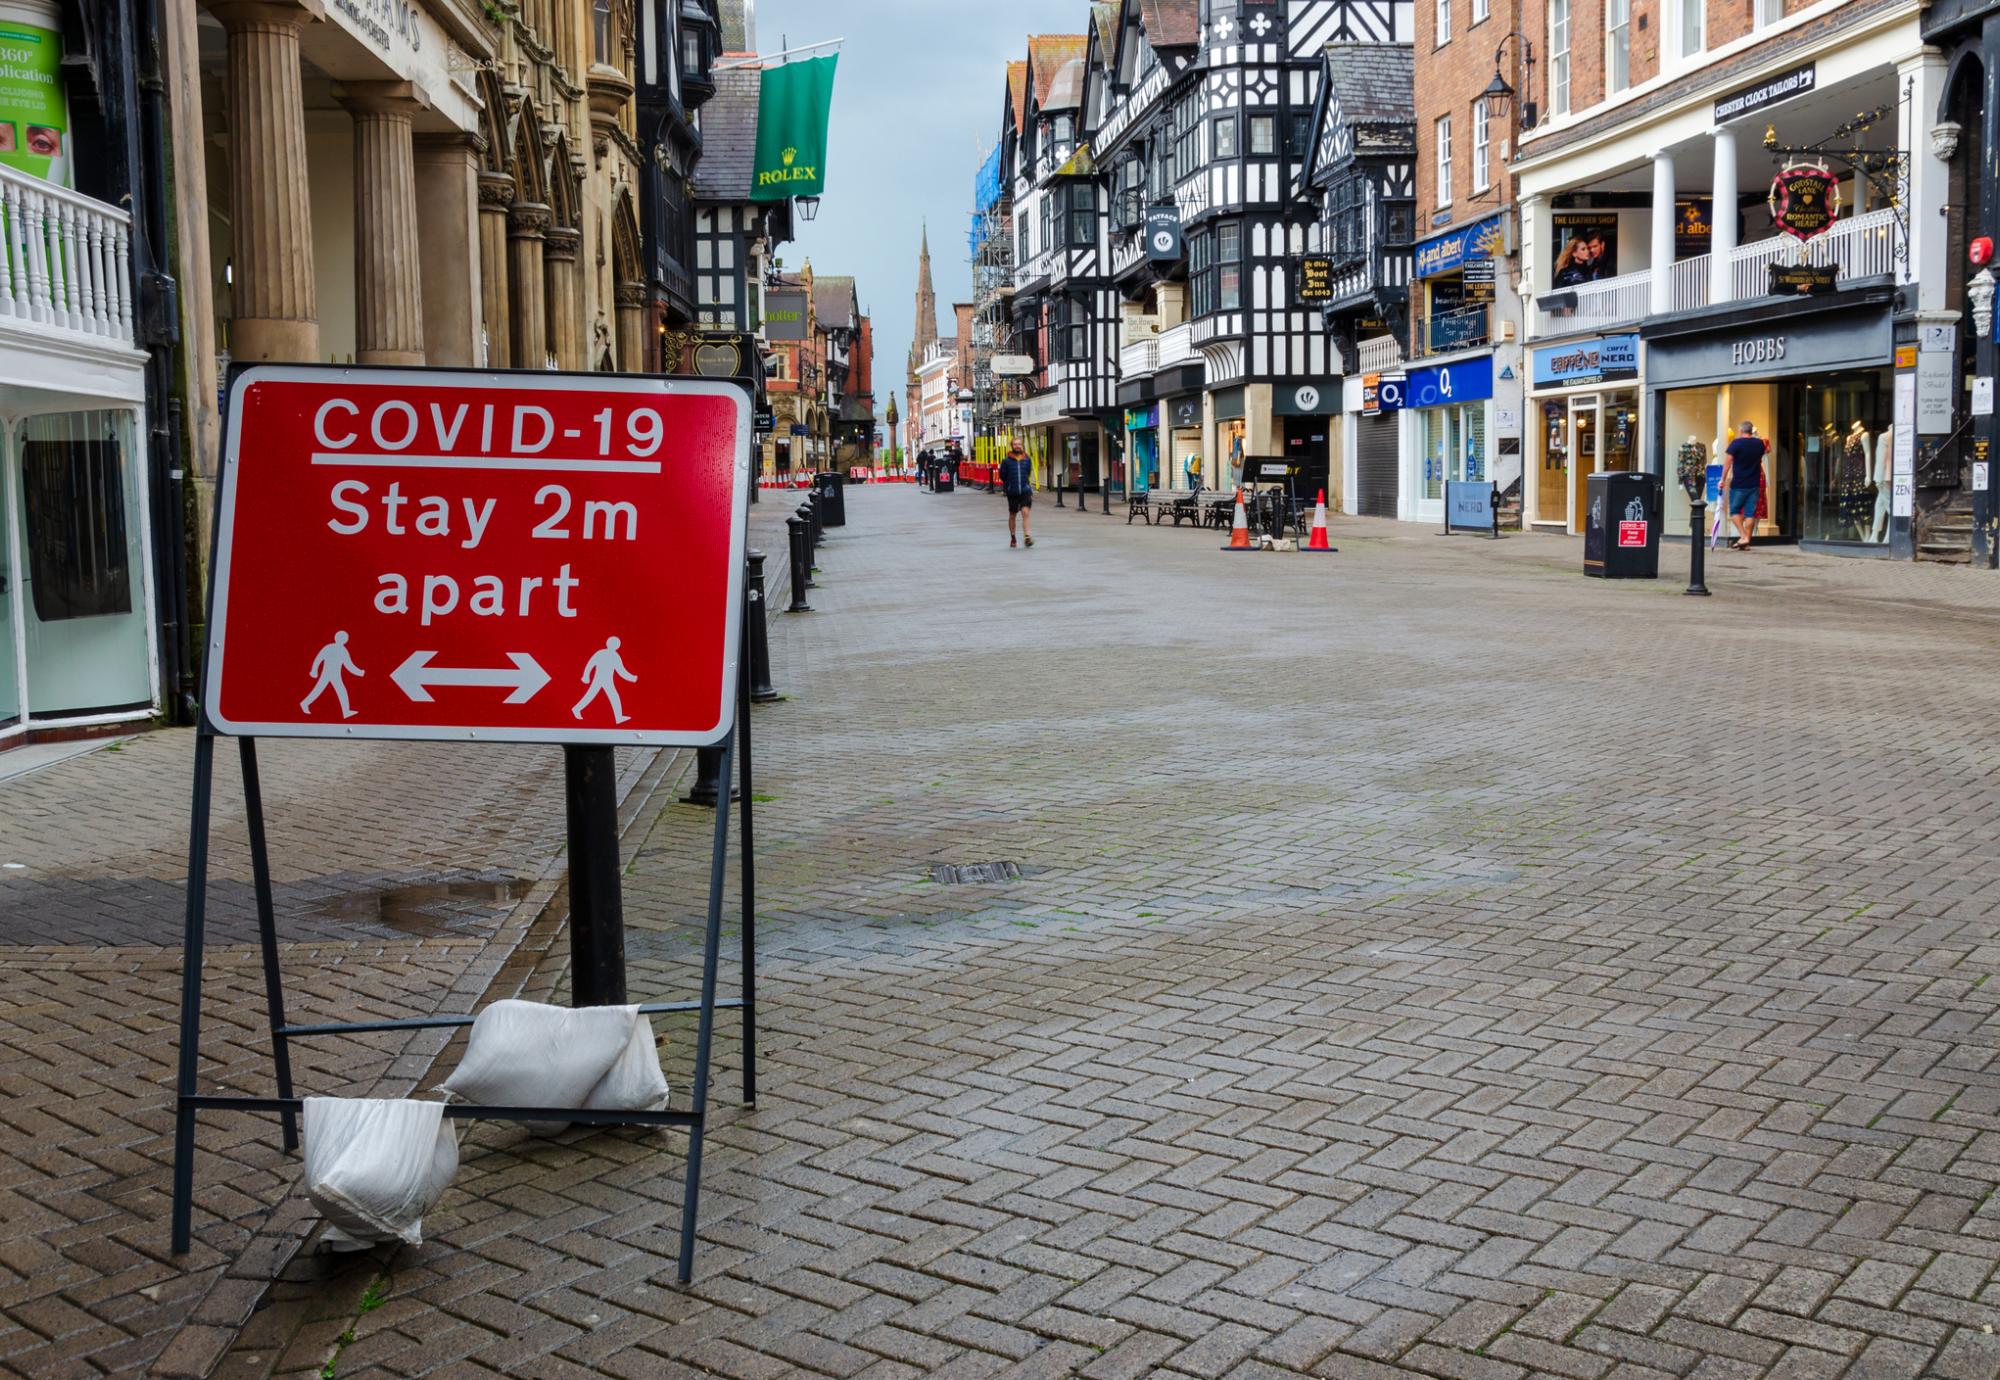 2m Social Distancing Sign on High Street